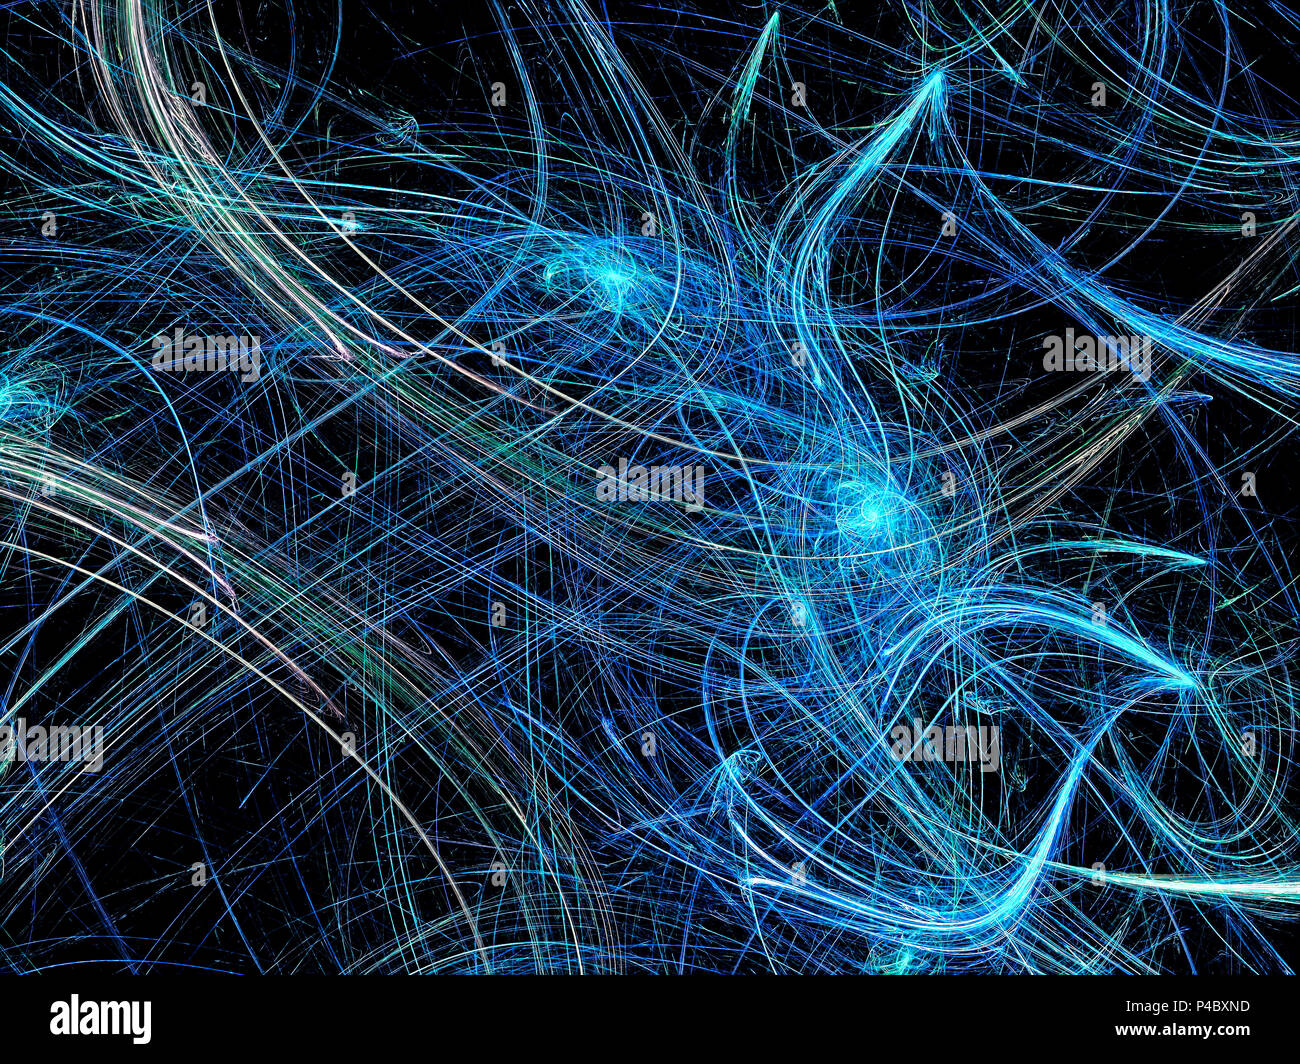 Abstract fractal background -  computer-generated image. Digital art: chaos curves or threads. Backdrop or texture for web design, covers, posters. Stock Photo